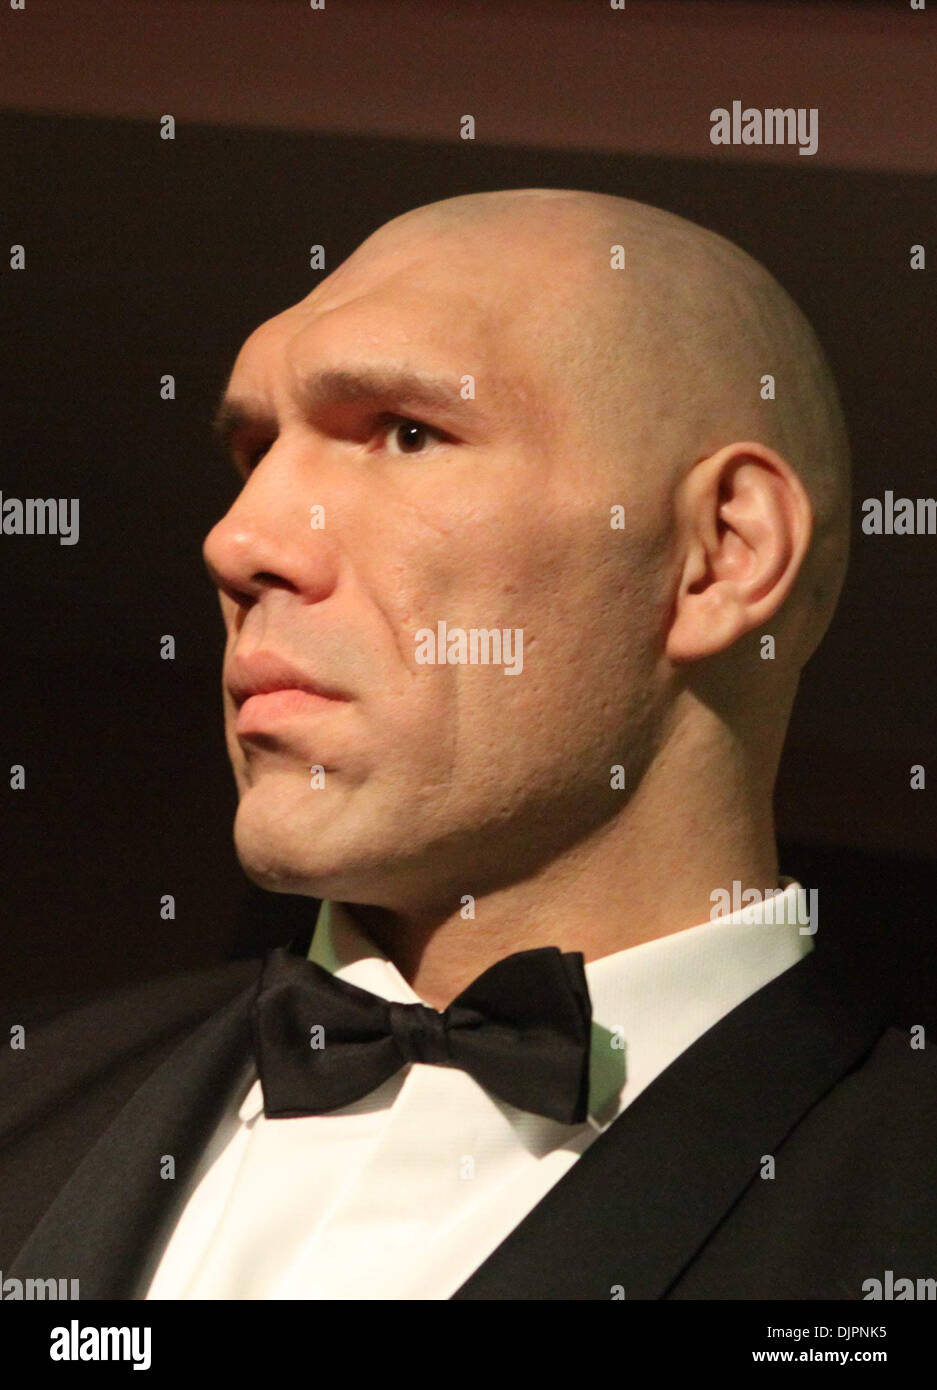 Mar 05, 2010 - St Petersburg, Russia - Former two-time WBA heavyweight champion NIKOLAI VALUEV ( who was nicknamed `The Beast from the East` few years ago) attending the charity auction in Slavinsky Art Gallery of St.Petersburg. The charity auction was organized in support of kids suffering from cancer. (Credit Image: © PhotoXpress/ZUMA Press) Stock Photo